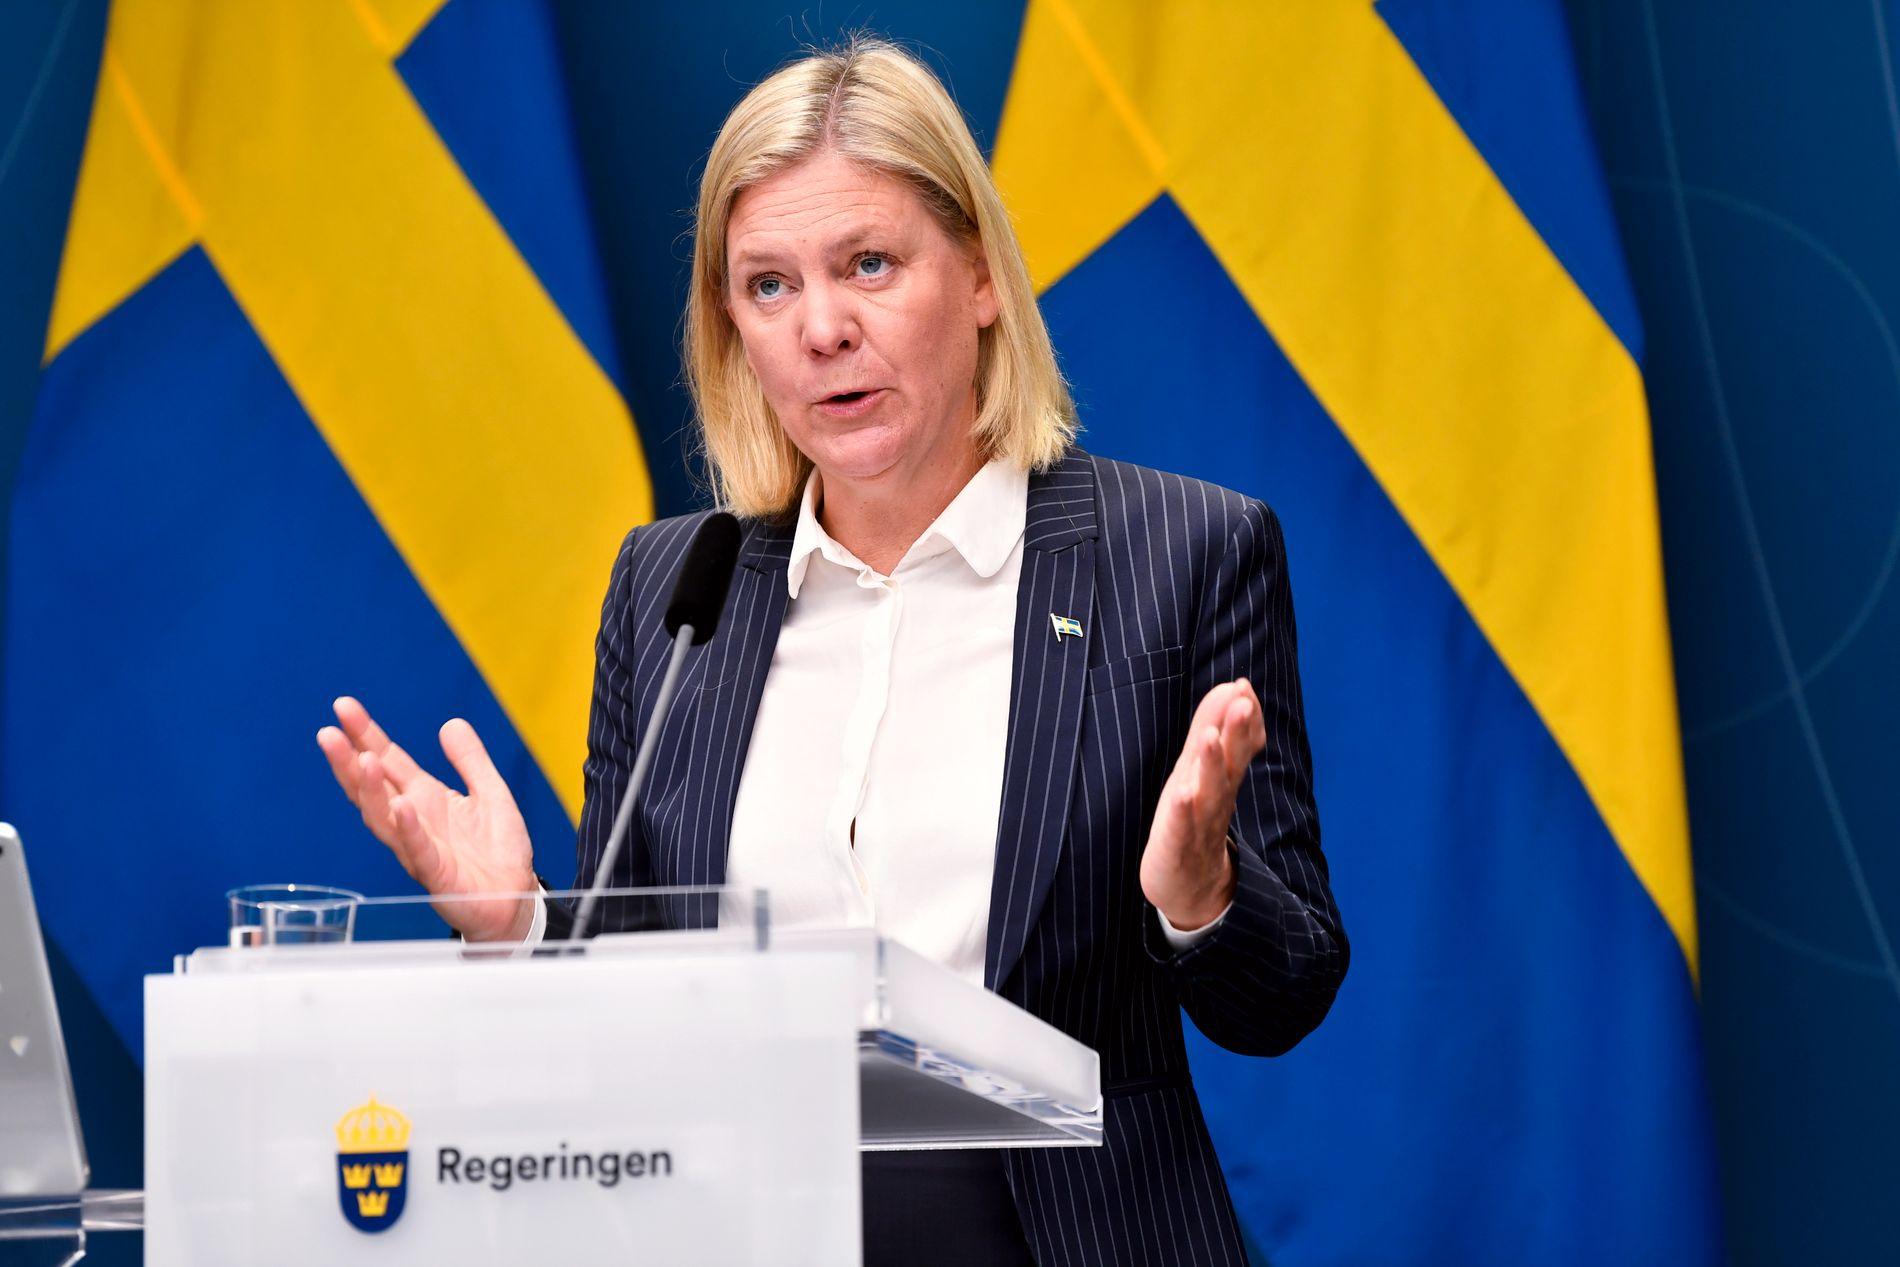 Sweden joins European countries in lifting anti-Covid restrictions